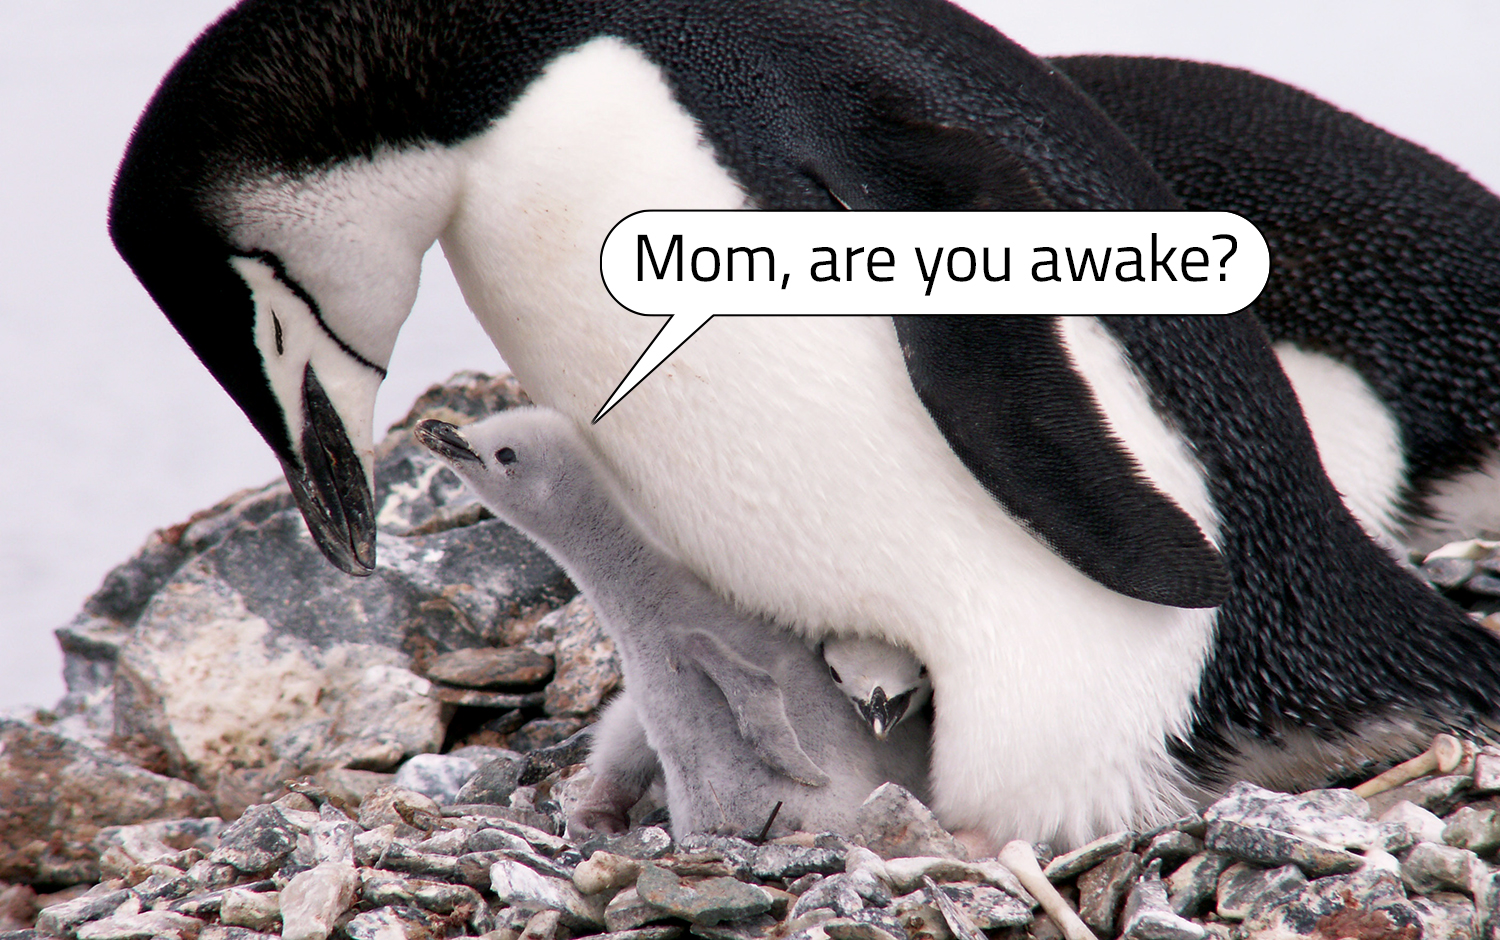 A penguin chick sits under an adult penguin with its eyes closed and a speech bubble says Mom, are you awake.